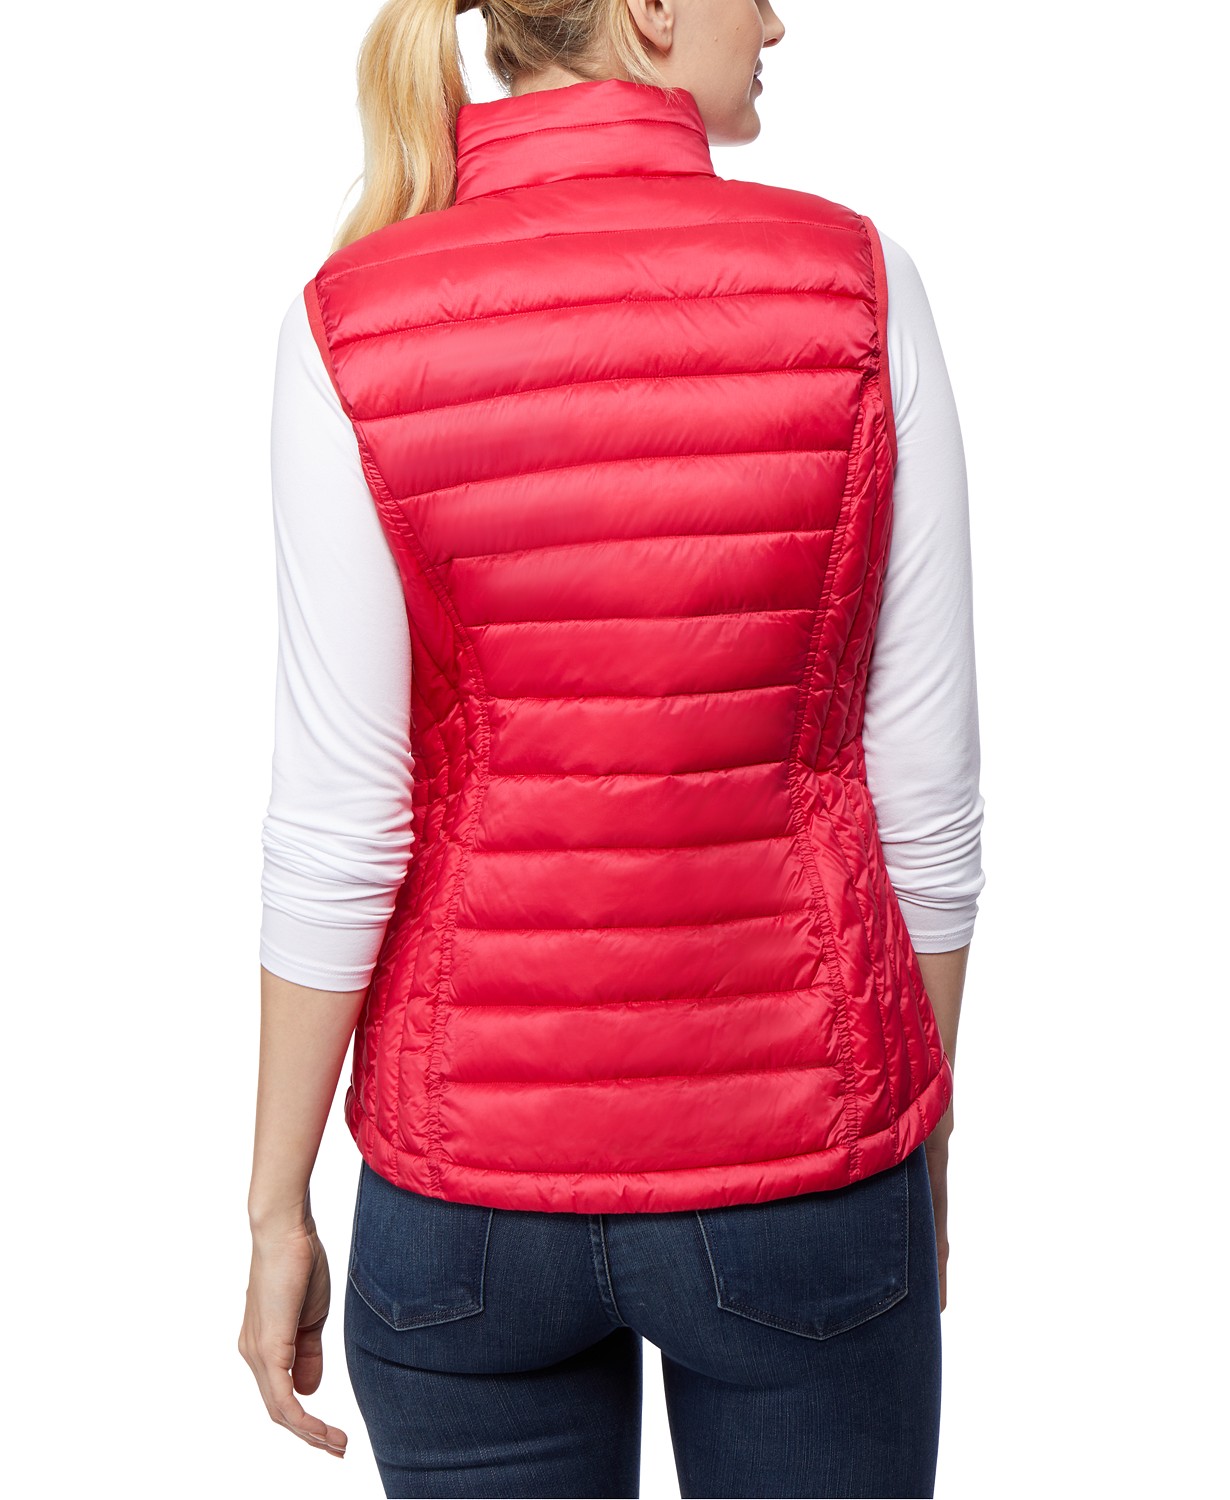 www.couturepoint.com-tommy-hilfiger-womens-red-puffer-vest-copy